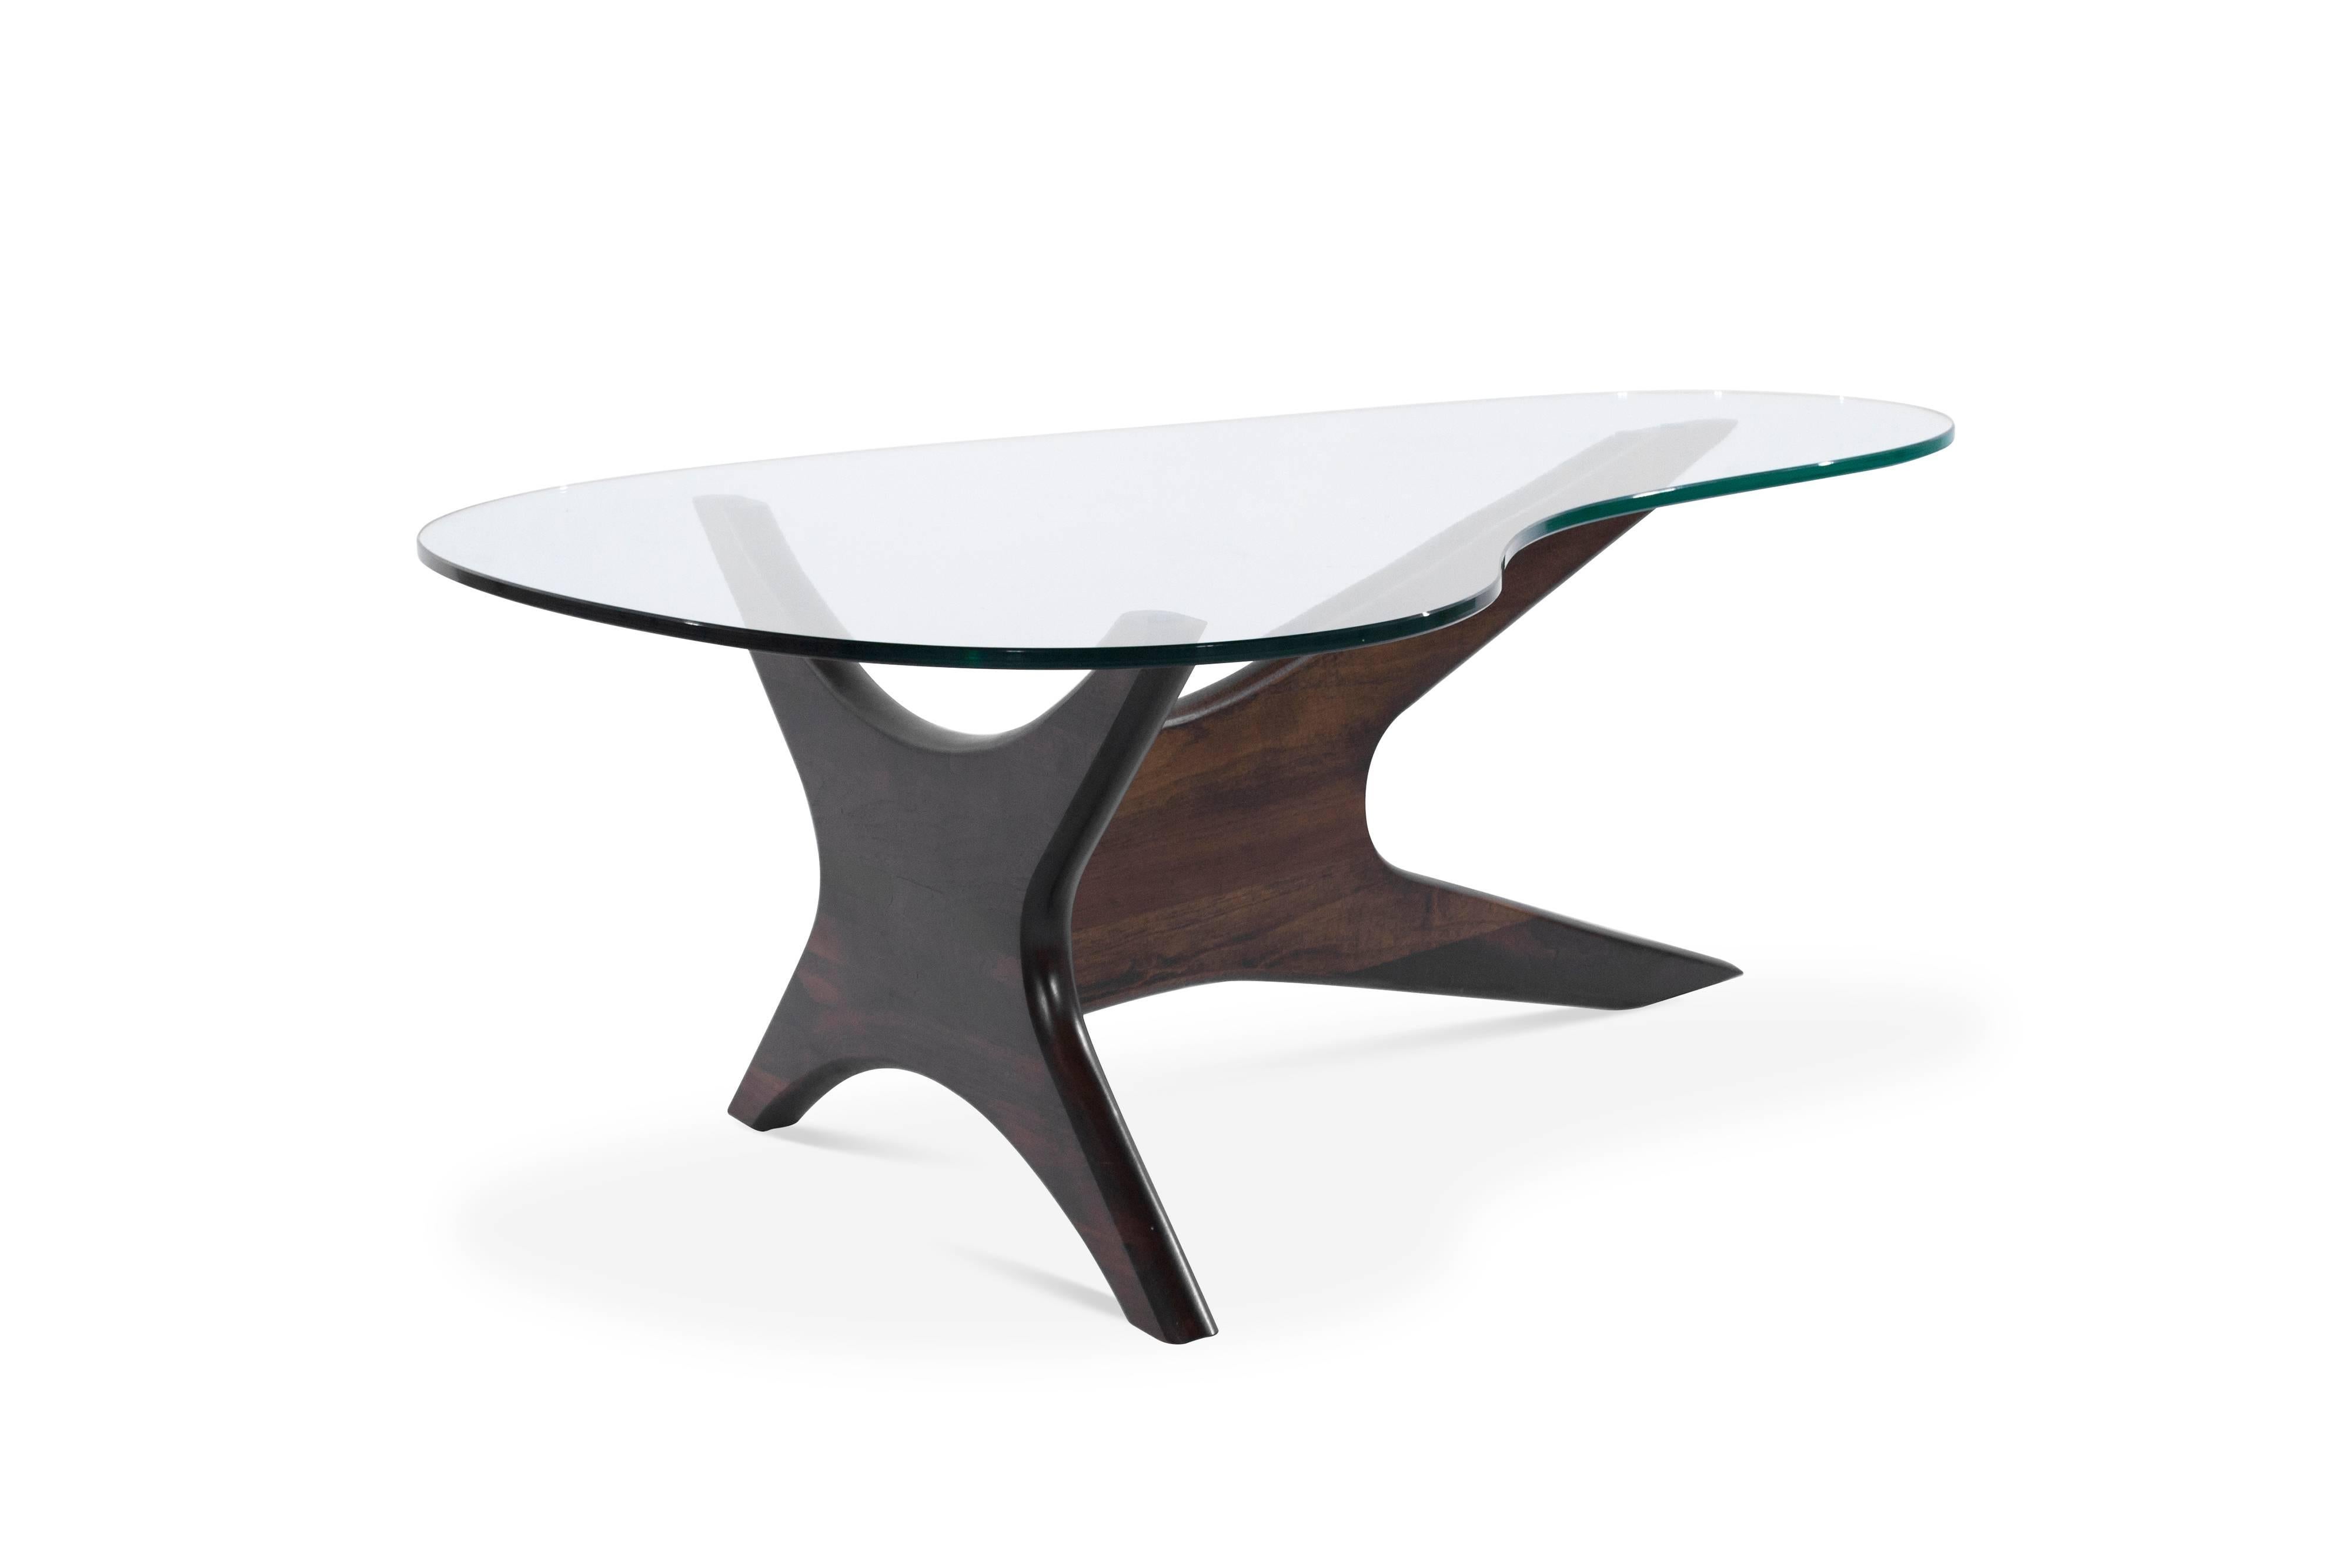 Biomorphic walnut and glass coffee table by Adrian Pearsall for Craft Associates, circa 1950s. 

Sculptural walnut base fully restored. New custom-made kidney shaped glass top.